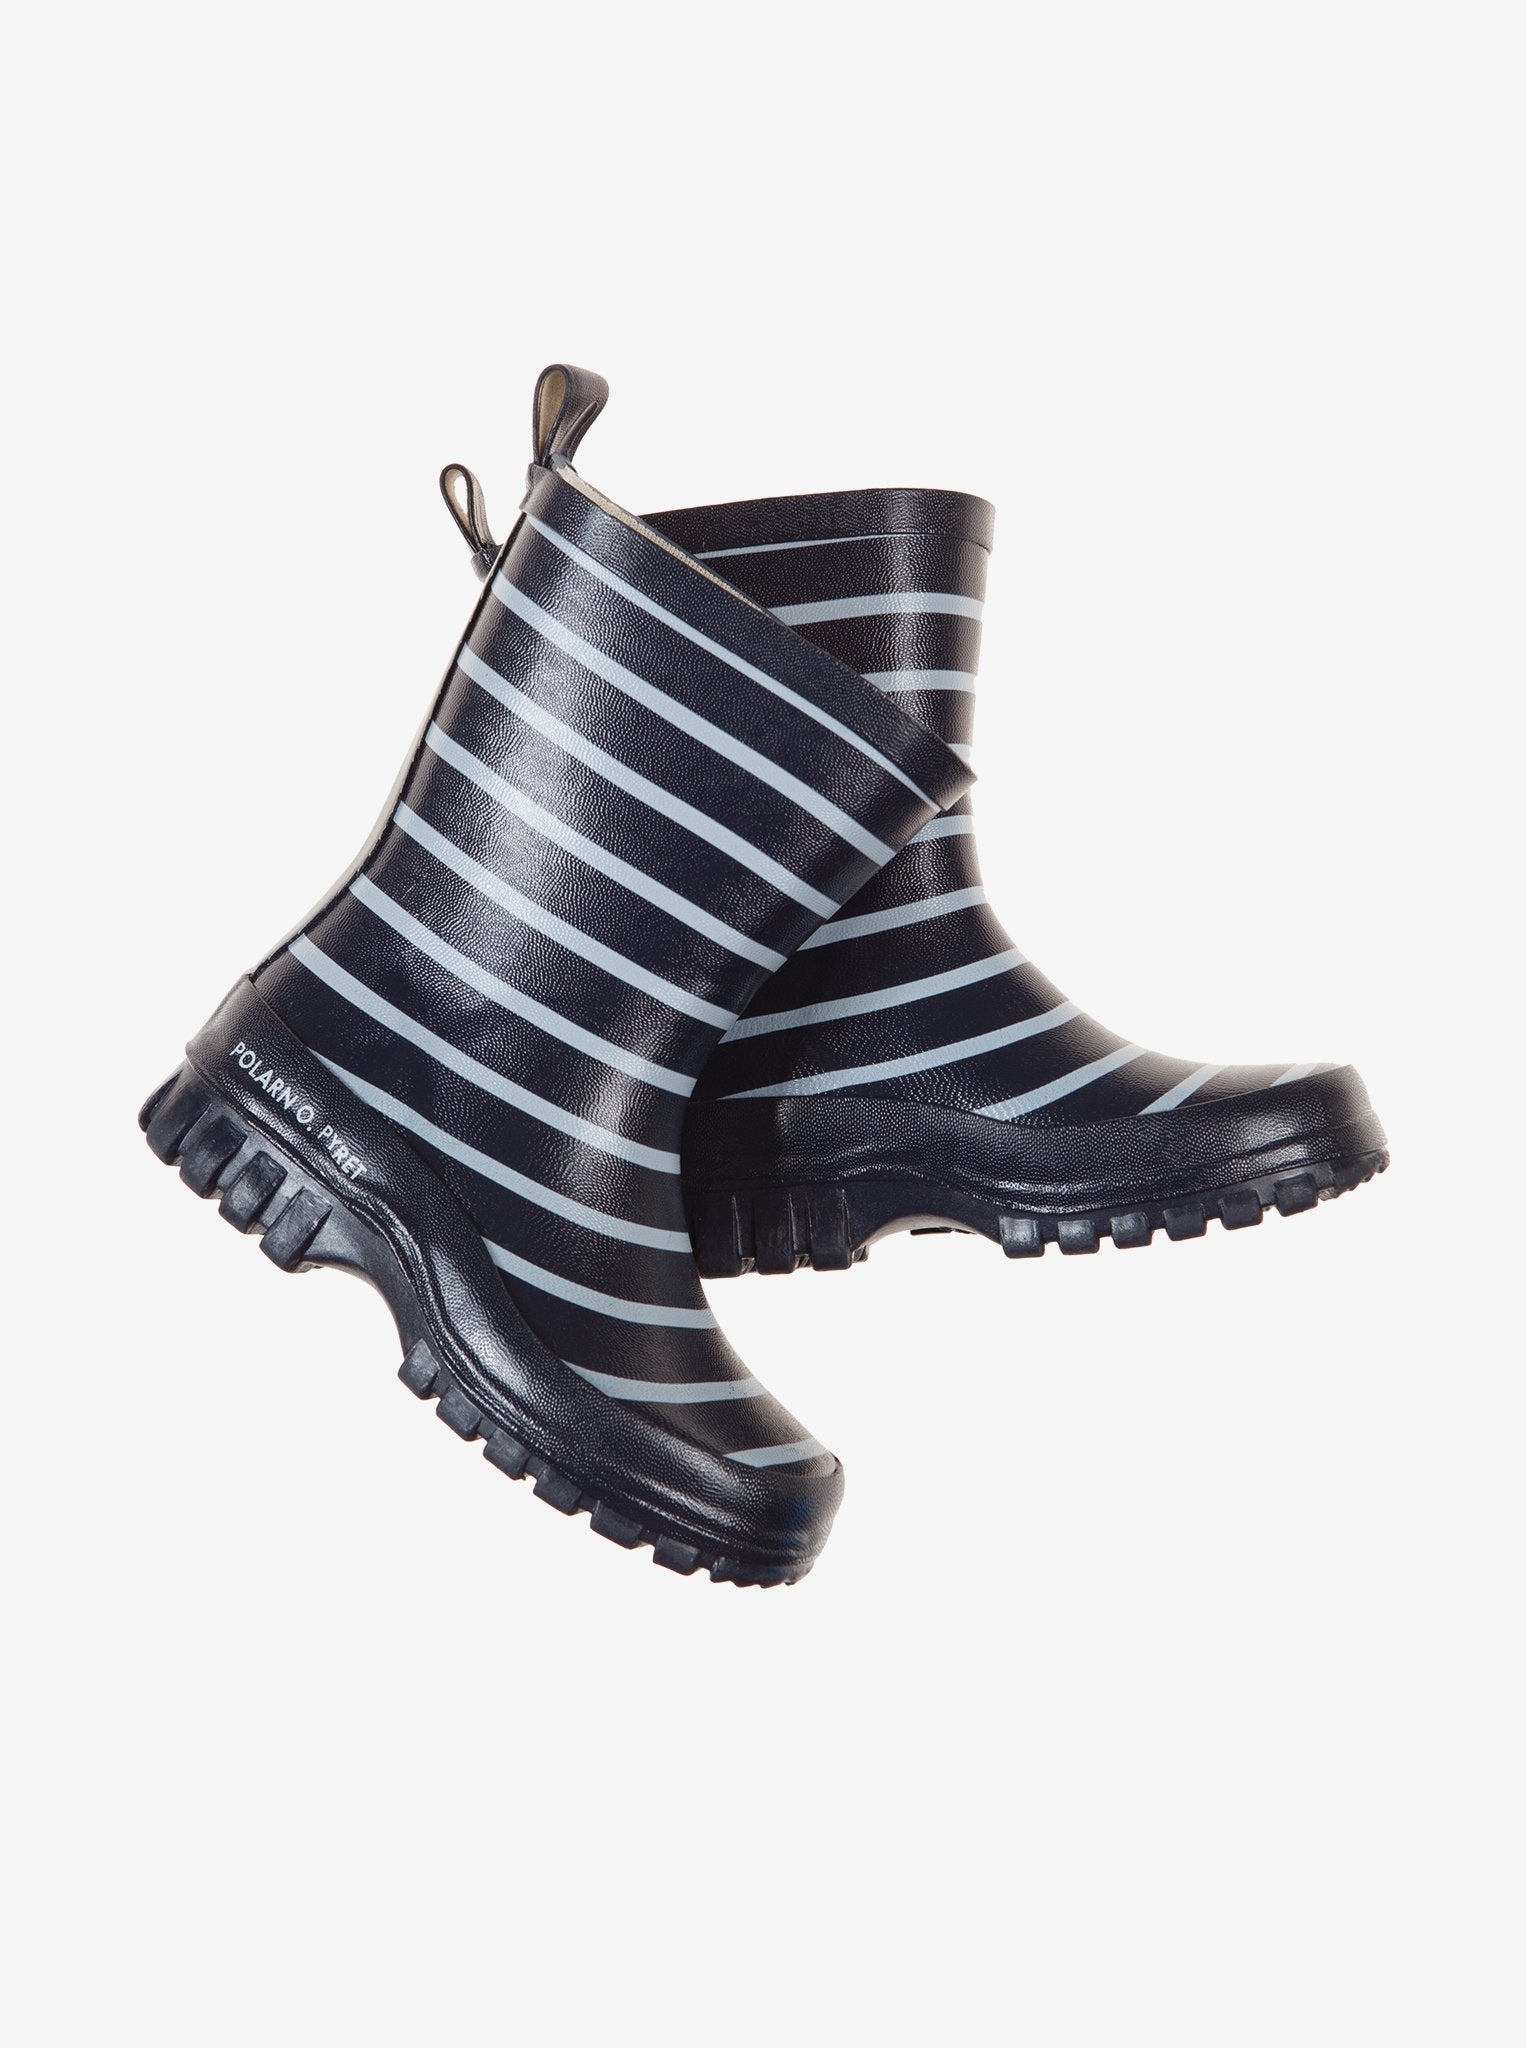 A pair of navy and white stripes kids wellies for rainy season, exterior is made of rubber and cotton for the inner lining.